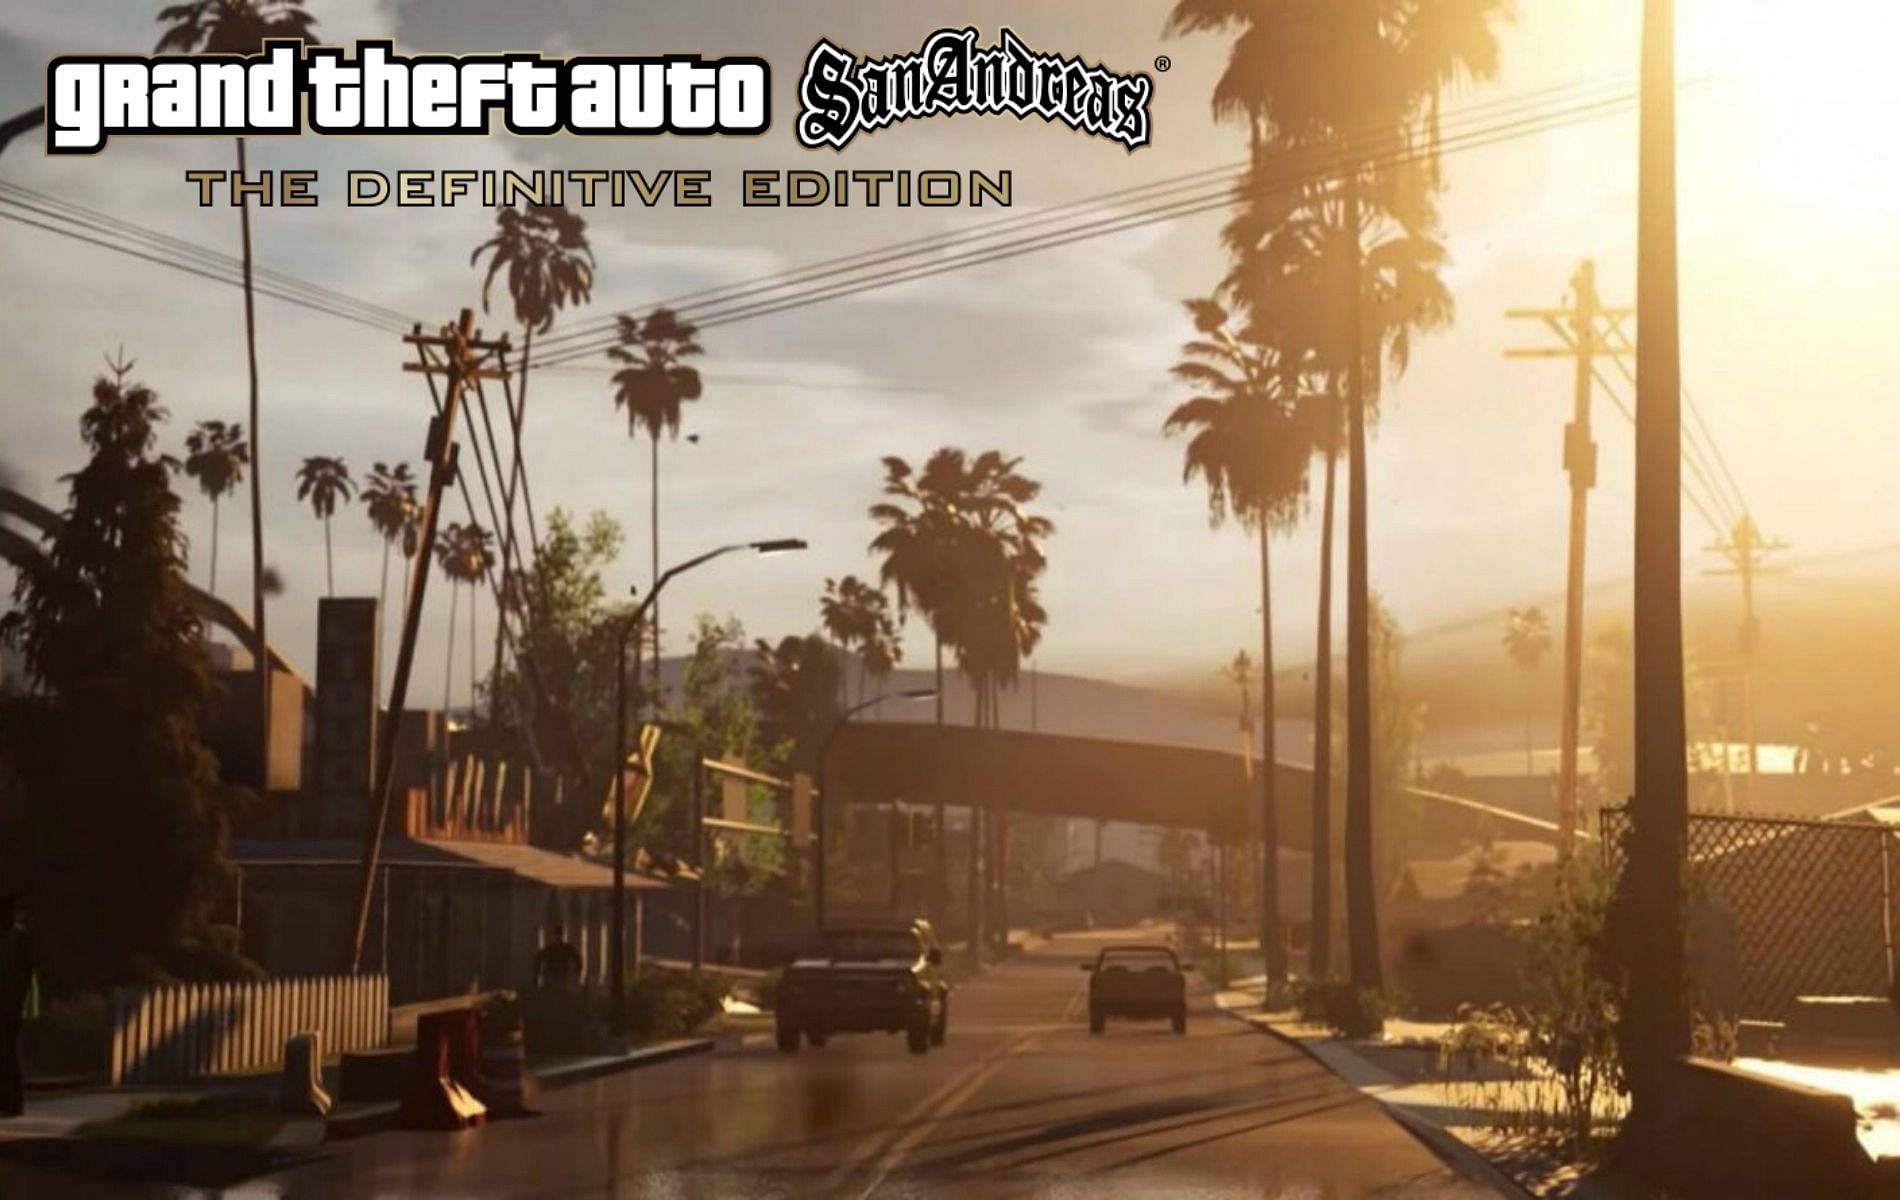 The GTA Remastered Trilogy will offer an enhanced experience over the originals (Image via Sportskeeda)